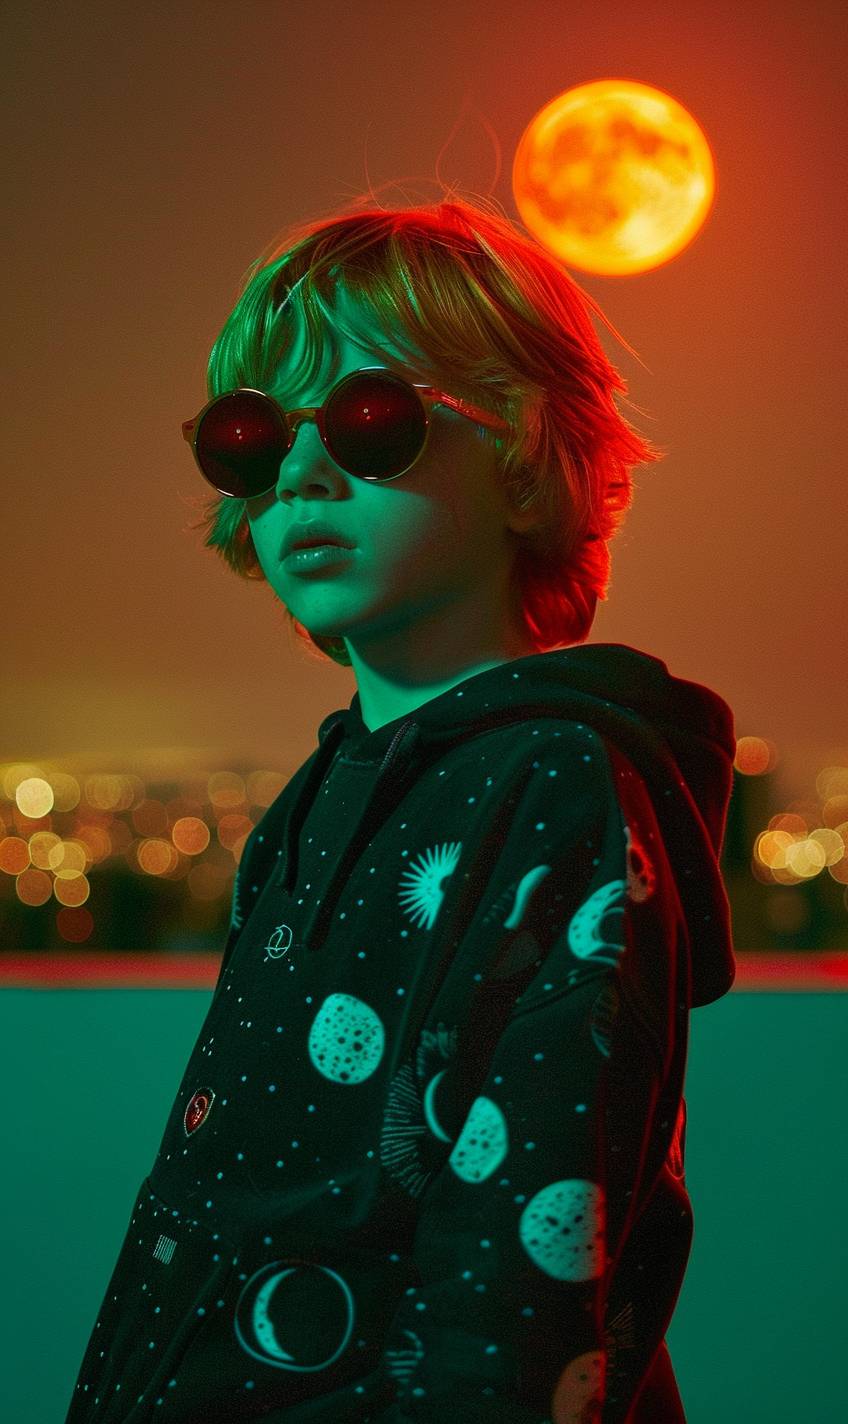 Redhead boy in sunglasses wearing black hoodie with cyan flower pattern. Photograph by Loretta Lux shot with green neon light. Night city in background. Red moon in orange sky.